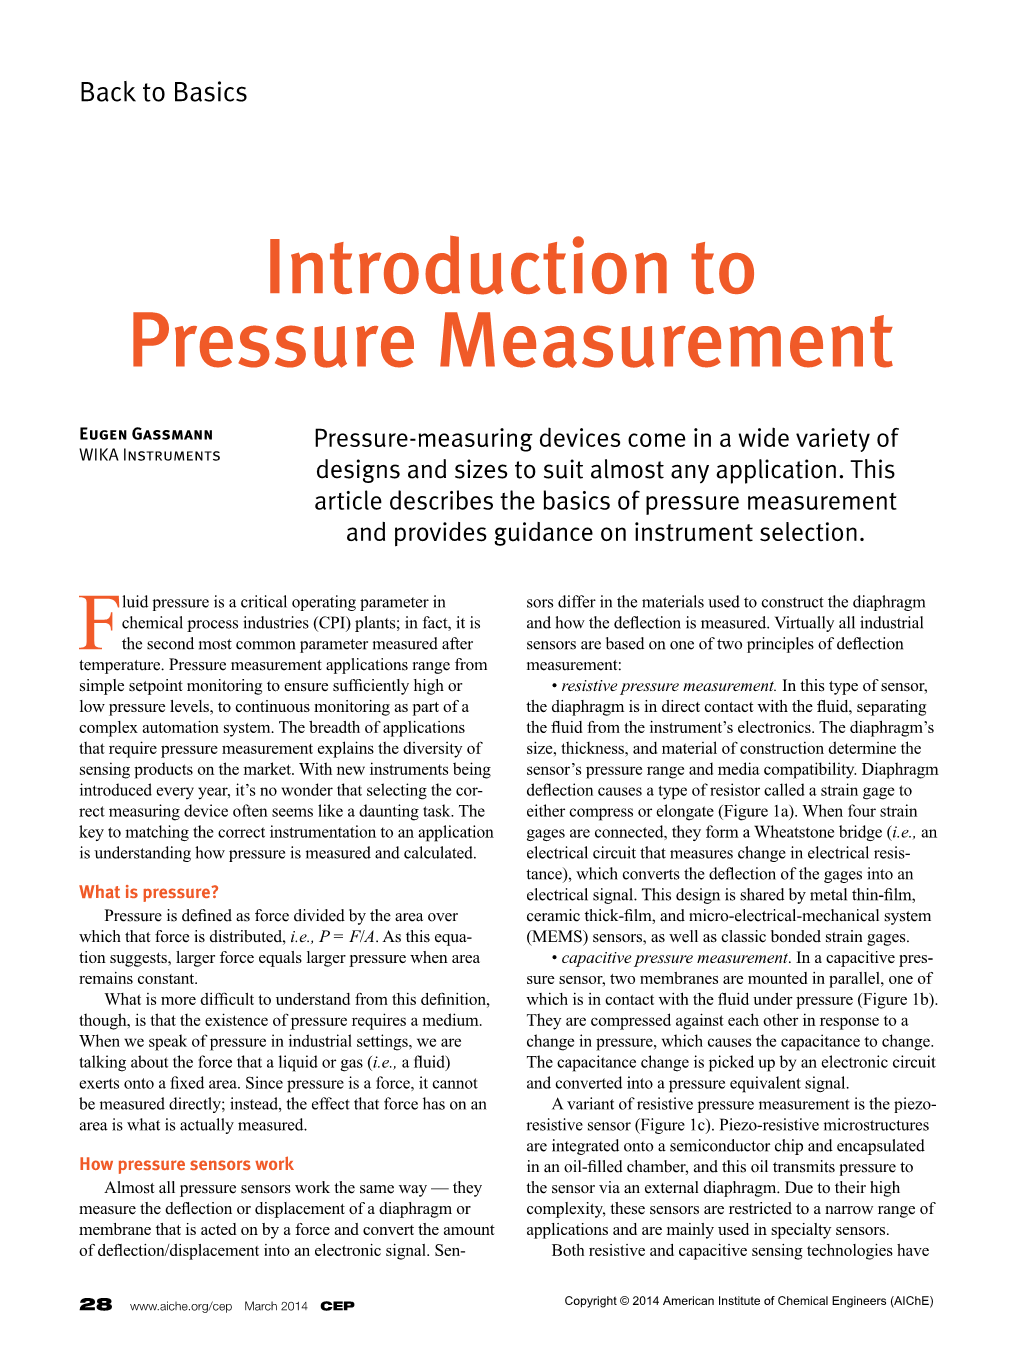 Introduction to Pressure Measurement